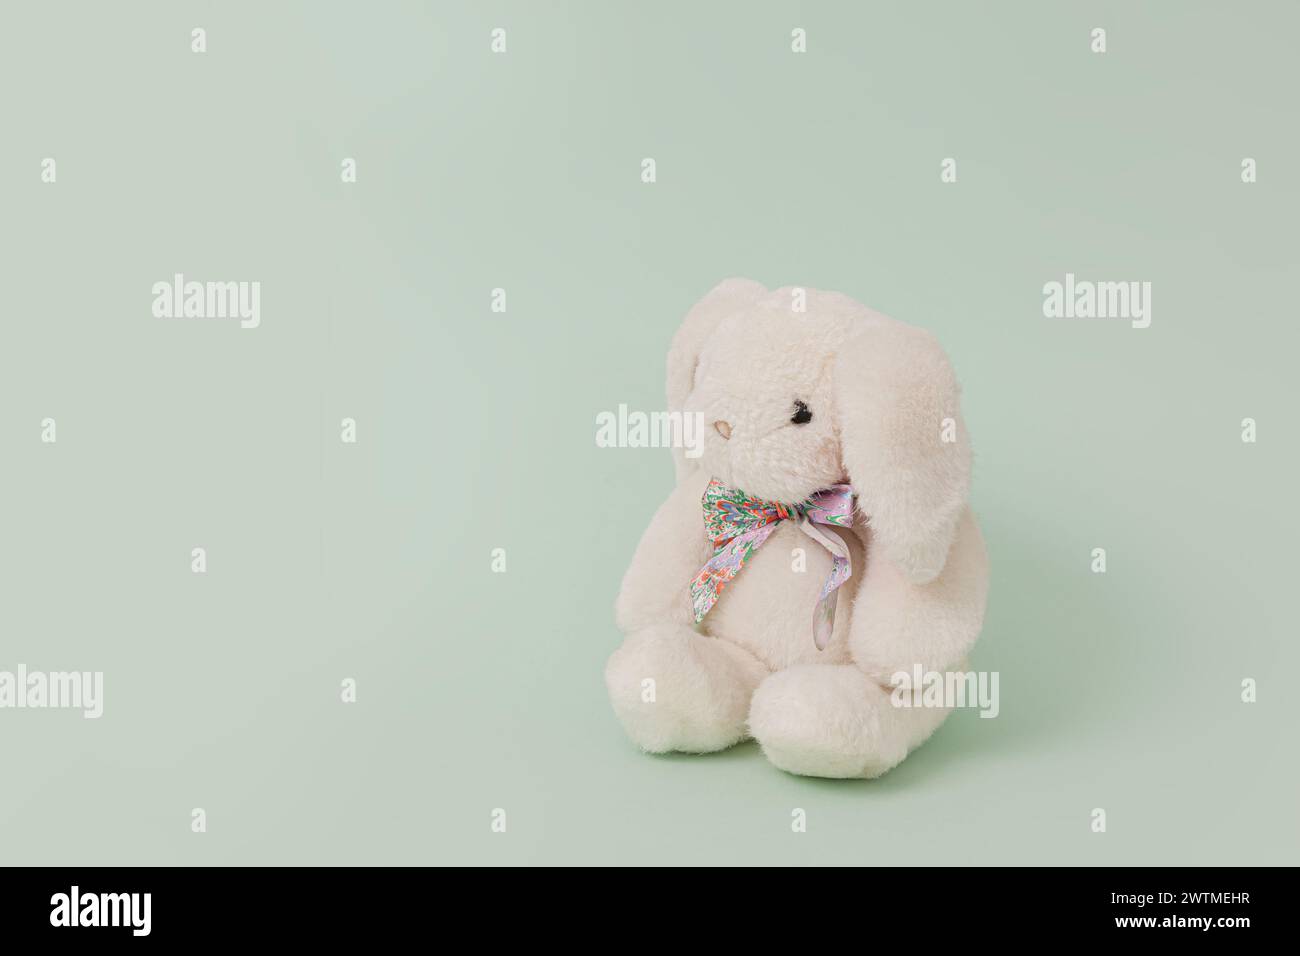 White plush toy rabbit isolated on pale green background; bunny perspective view Stock Photo